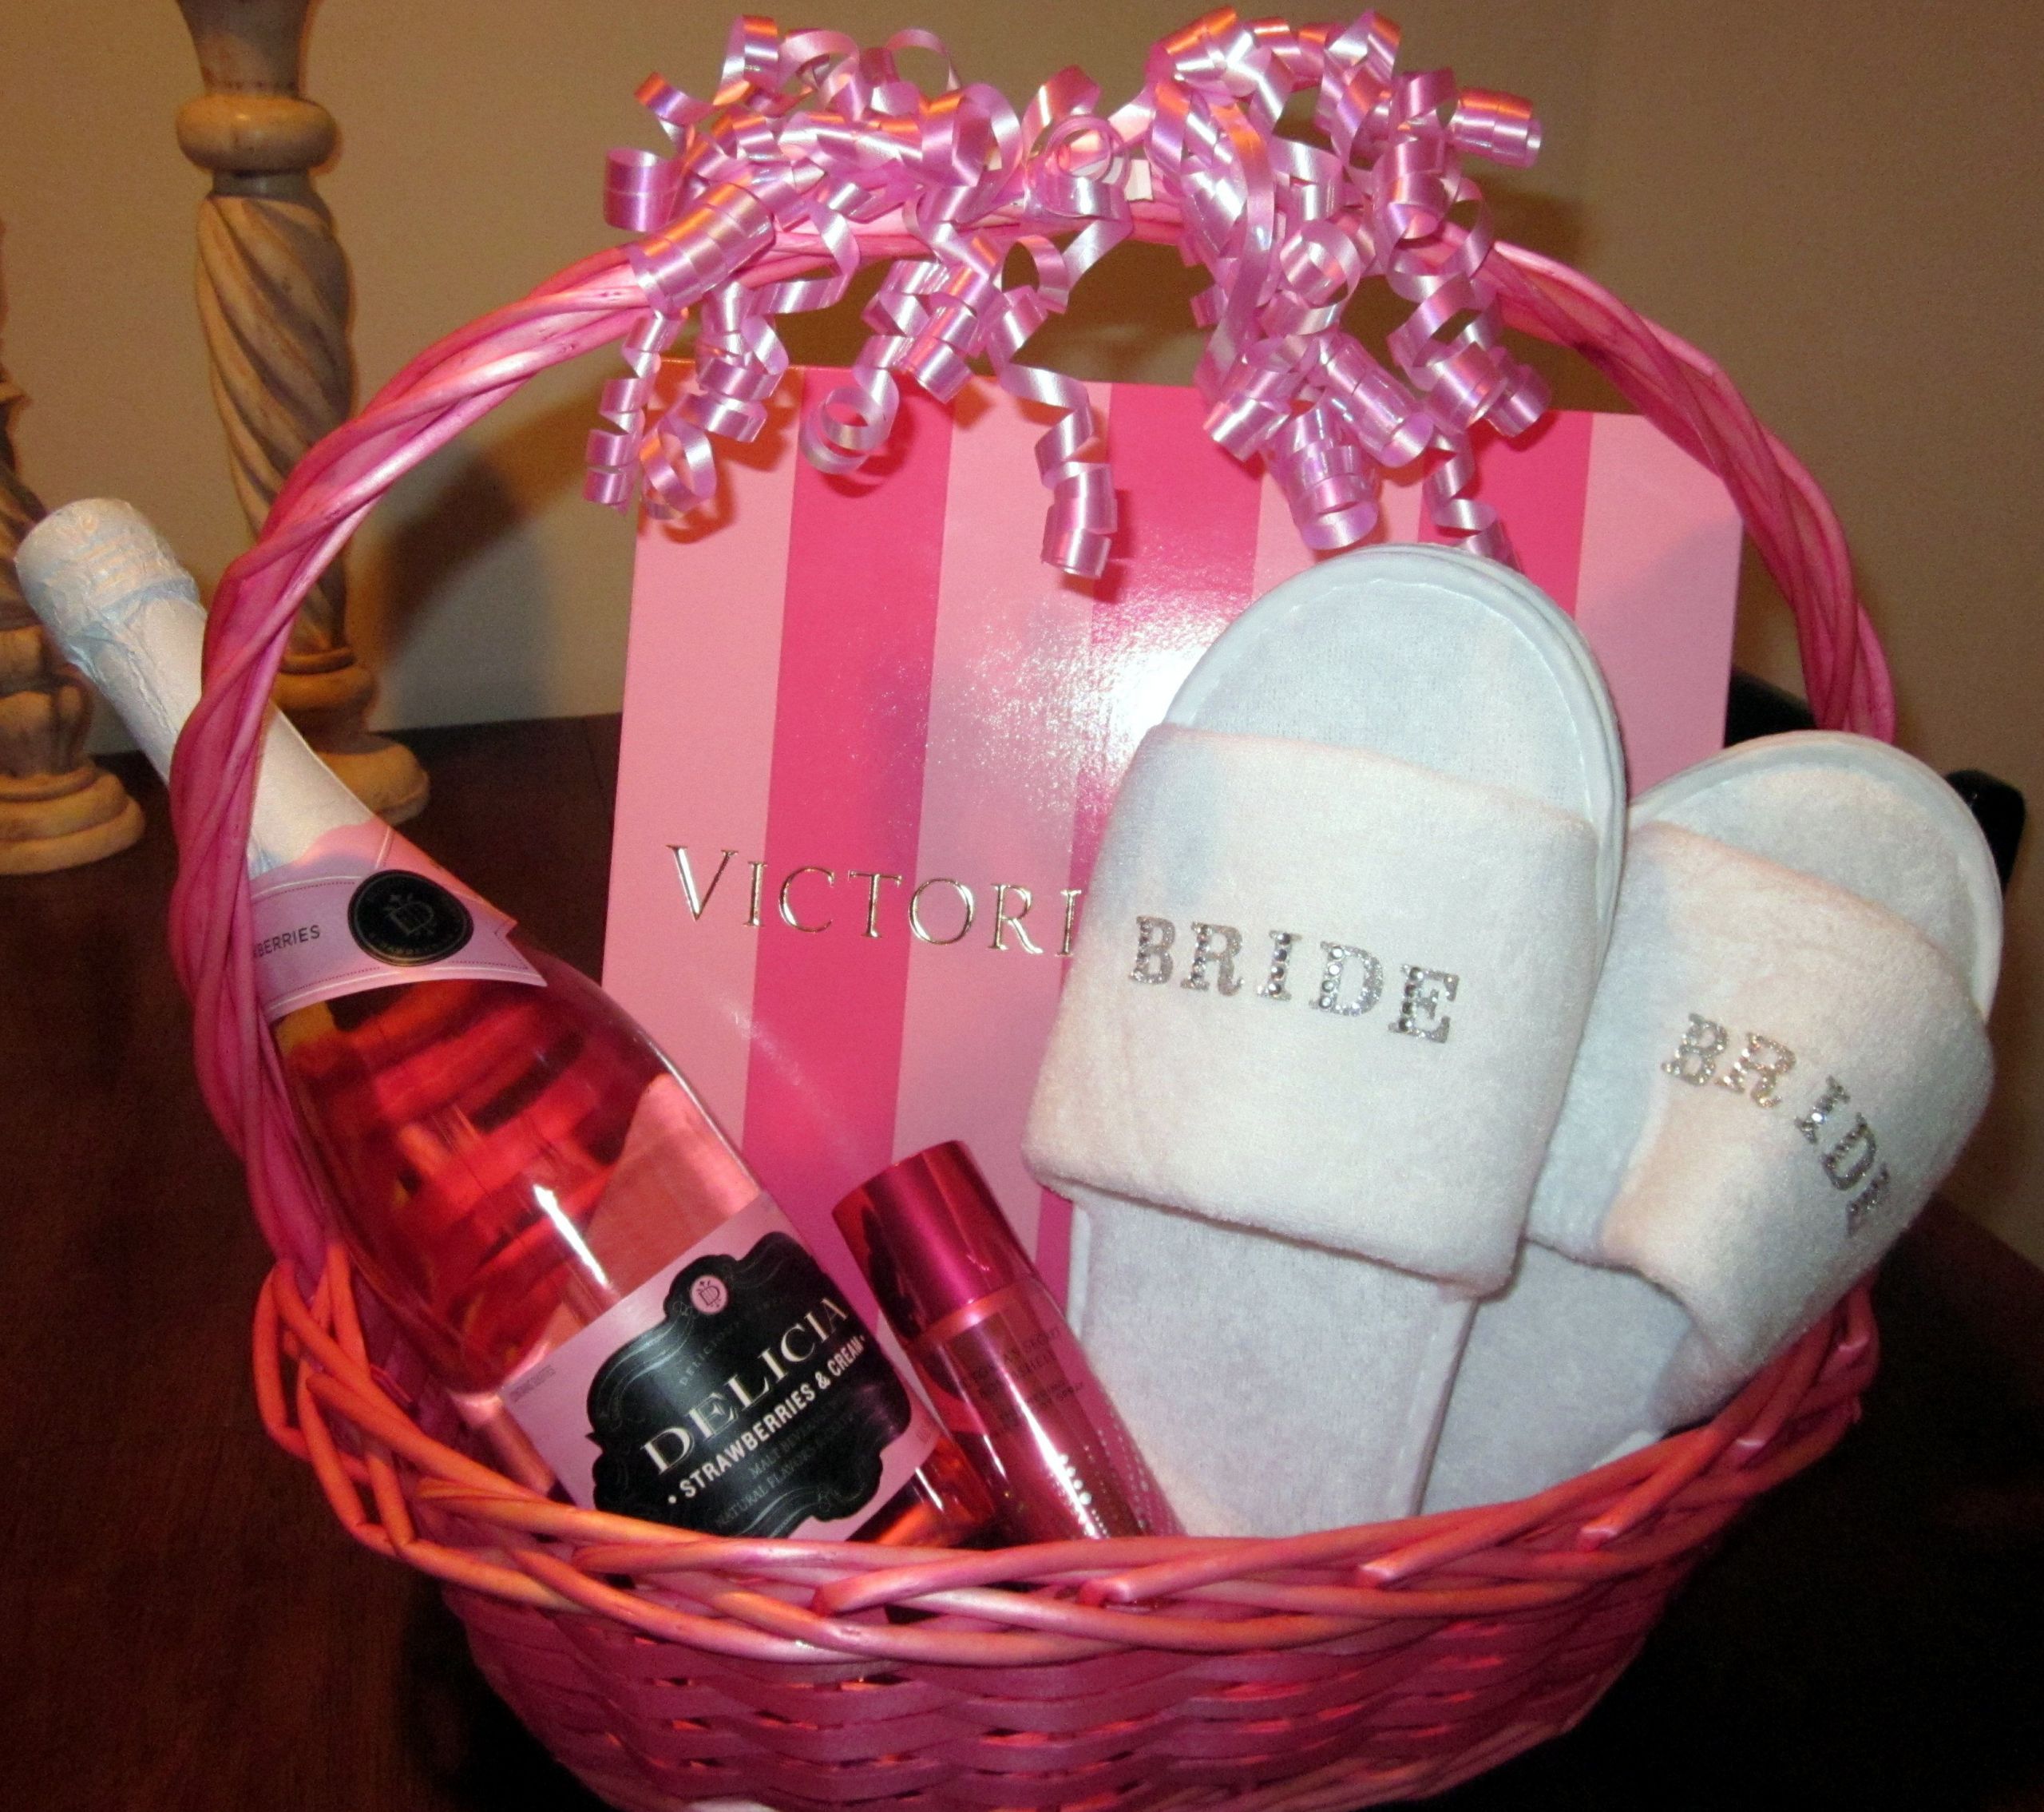 Ideas For A Wedding Gift
 Bridal Shower Gift Ideas She ll Adore